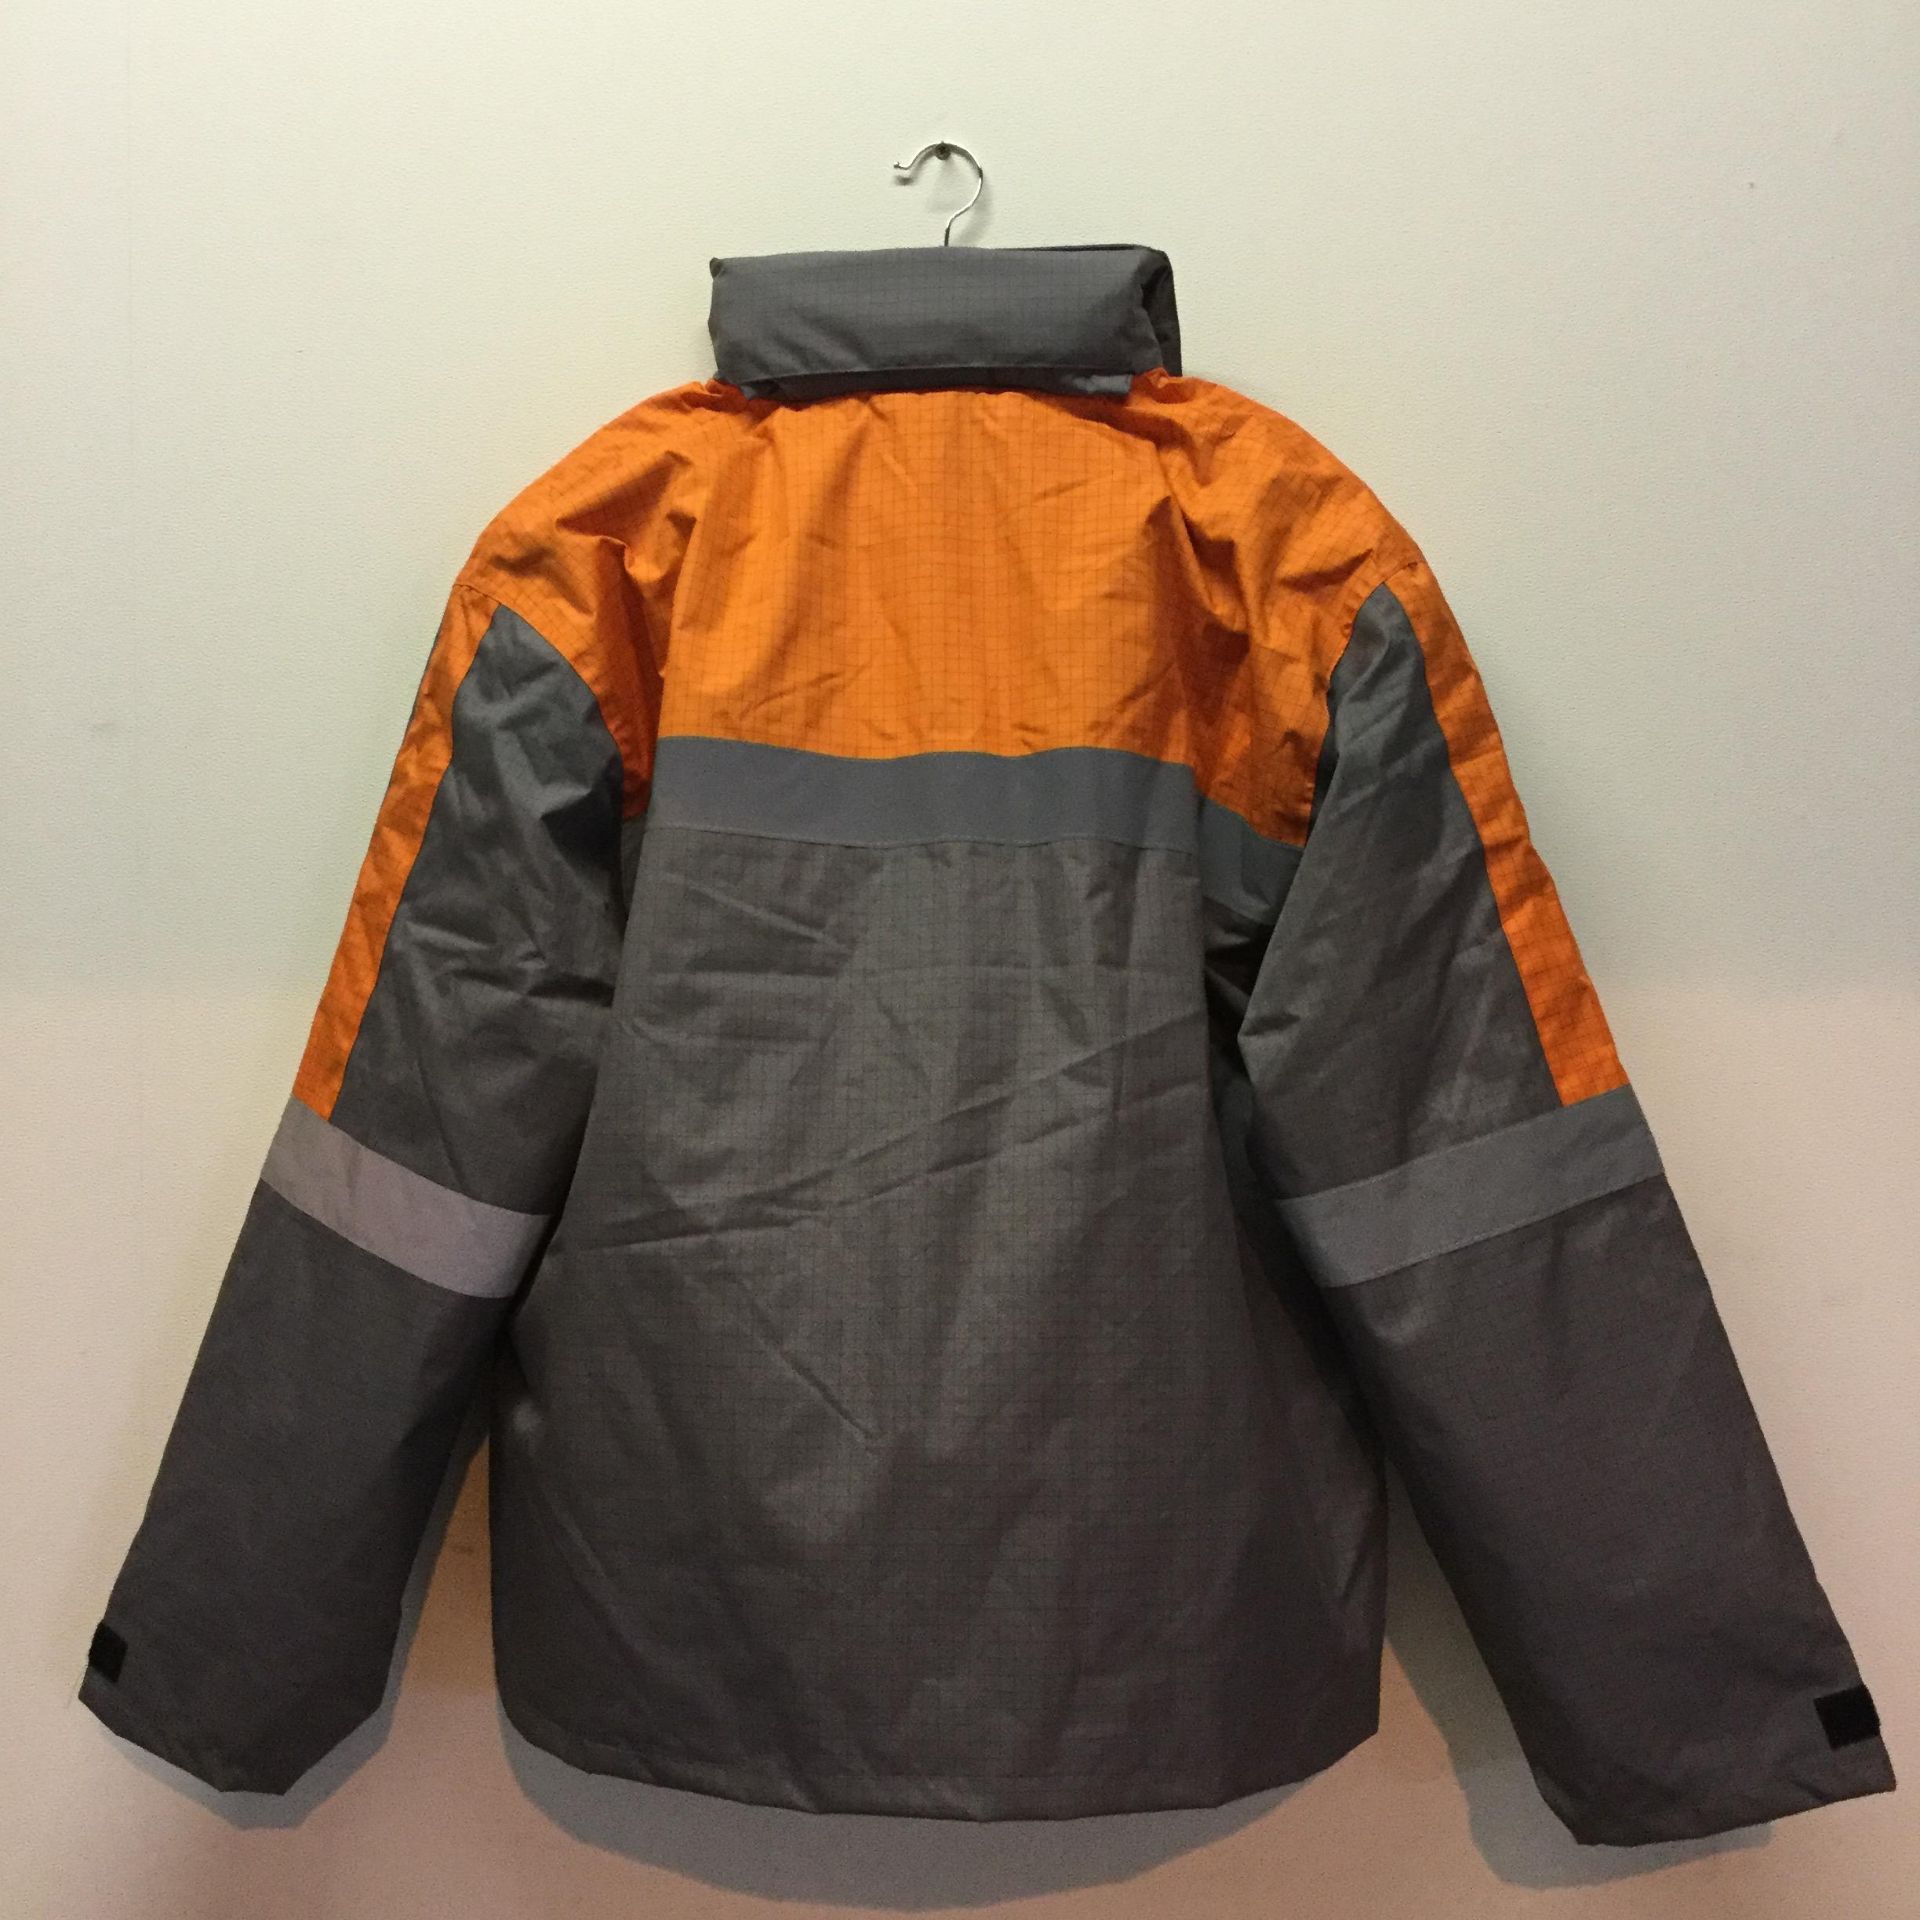 All Weather 3 layer Gortex Antistatic waterproof jacket - Size 48 - Image 2 of 2